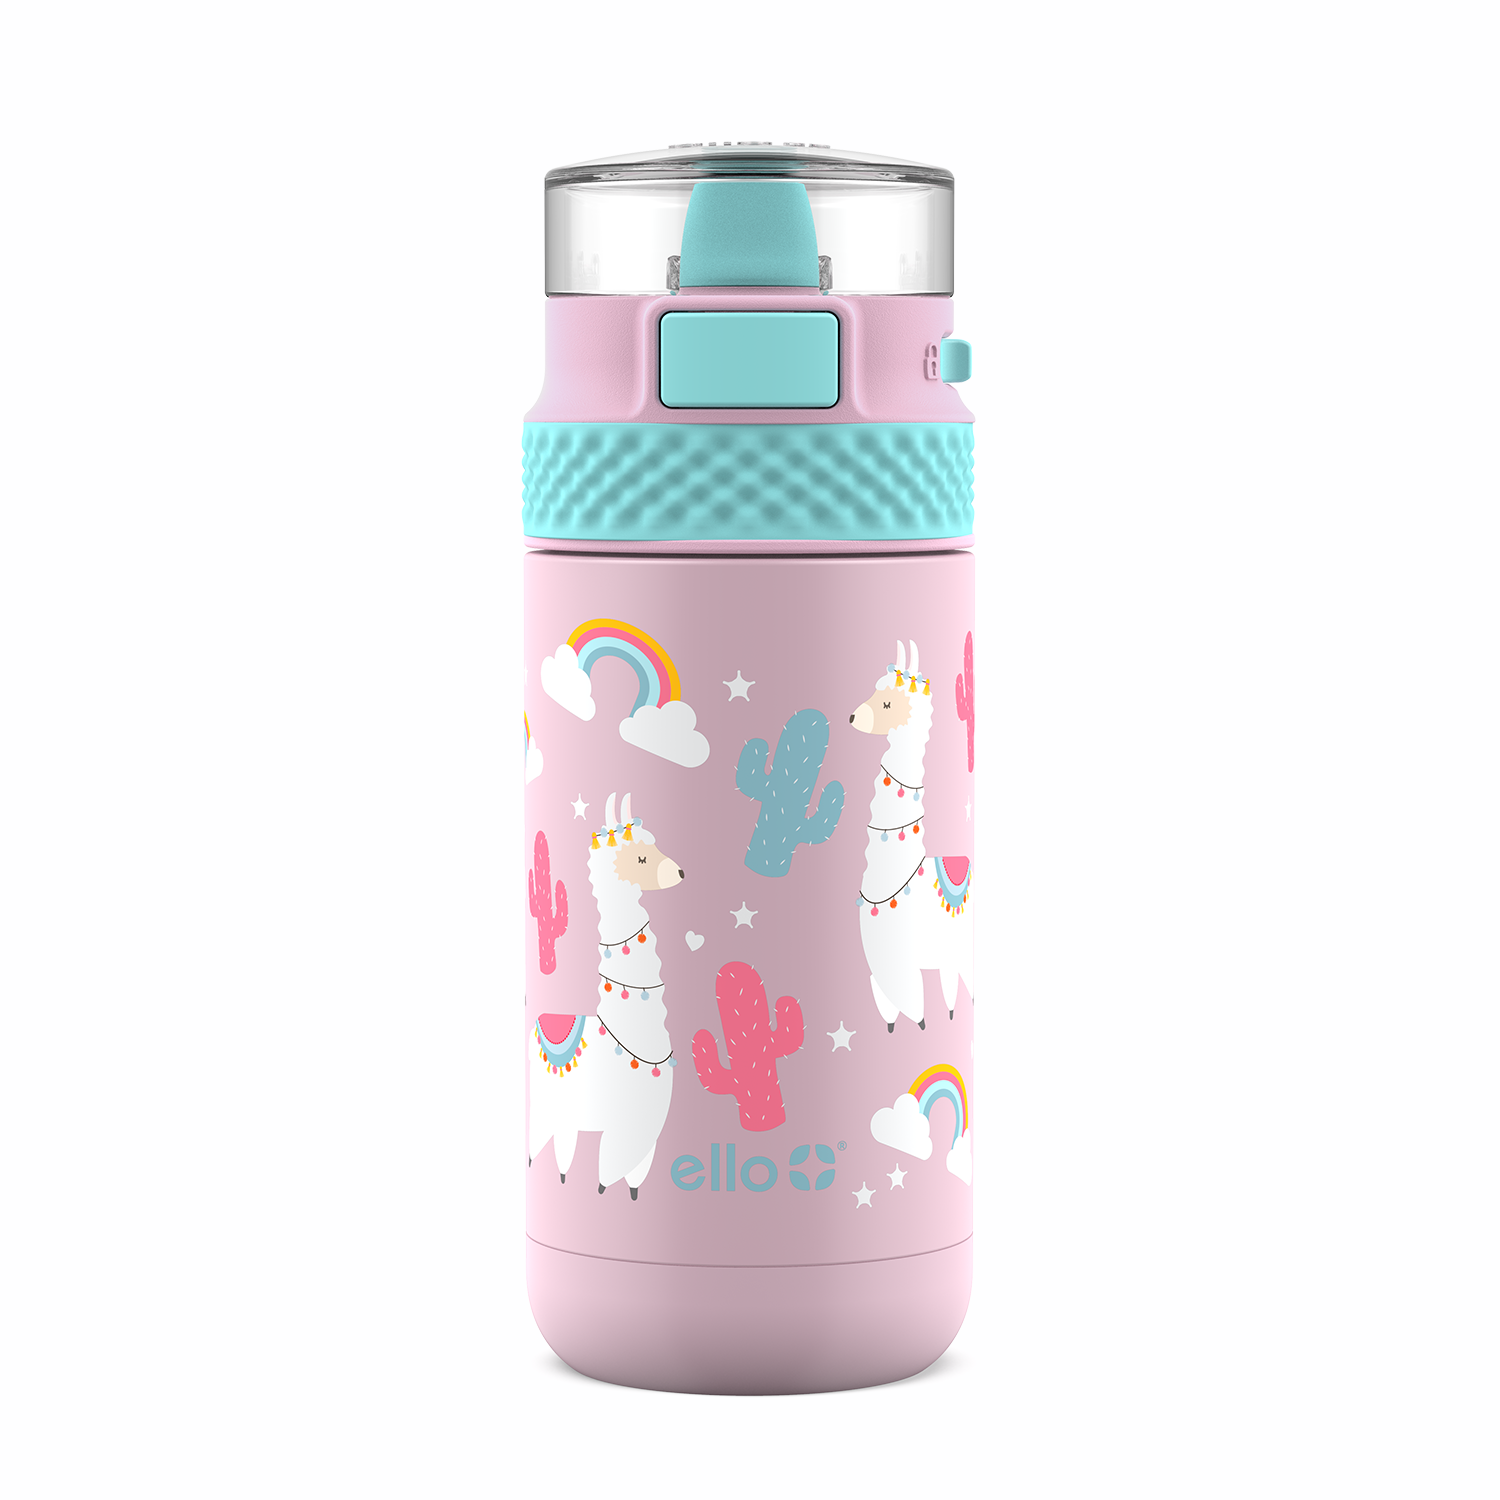 Ello Emma 14oz Vacuum Insulated Stainless Steel Kids Water Bottle with  Straw and Built-in Carrying Handle and Leak-Proof Locking Lid for School